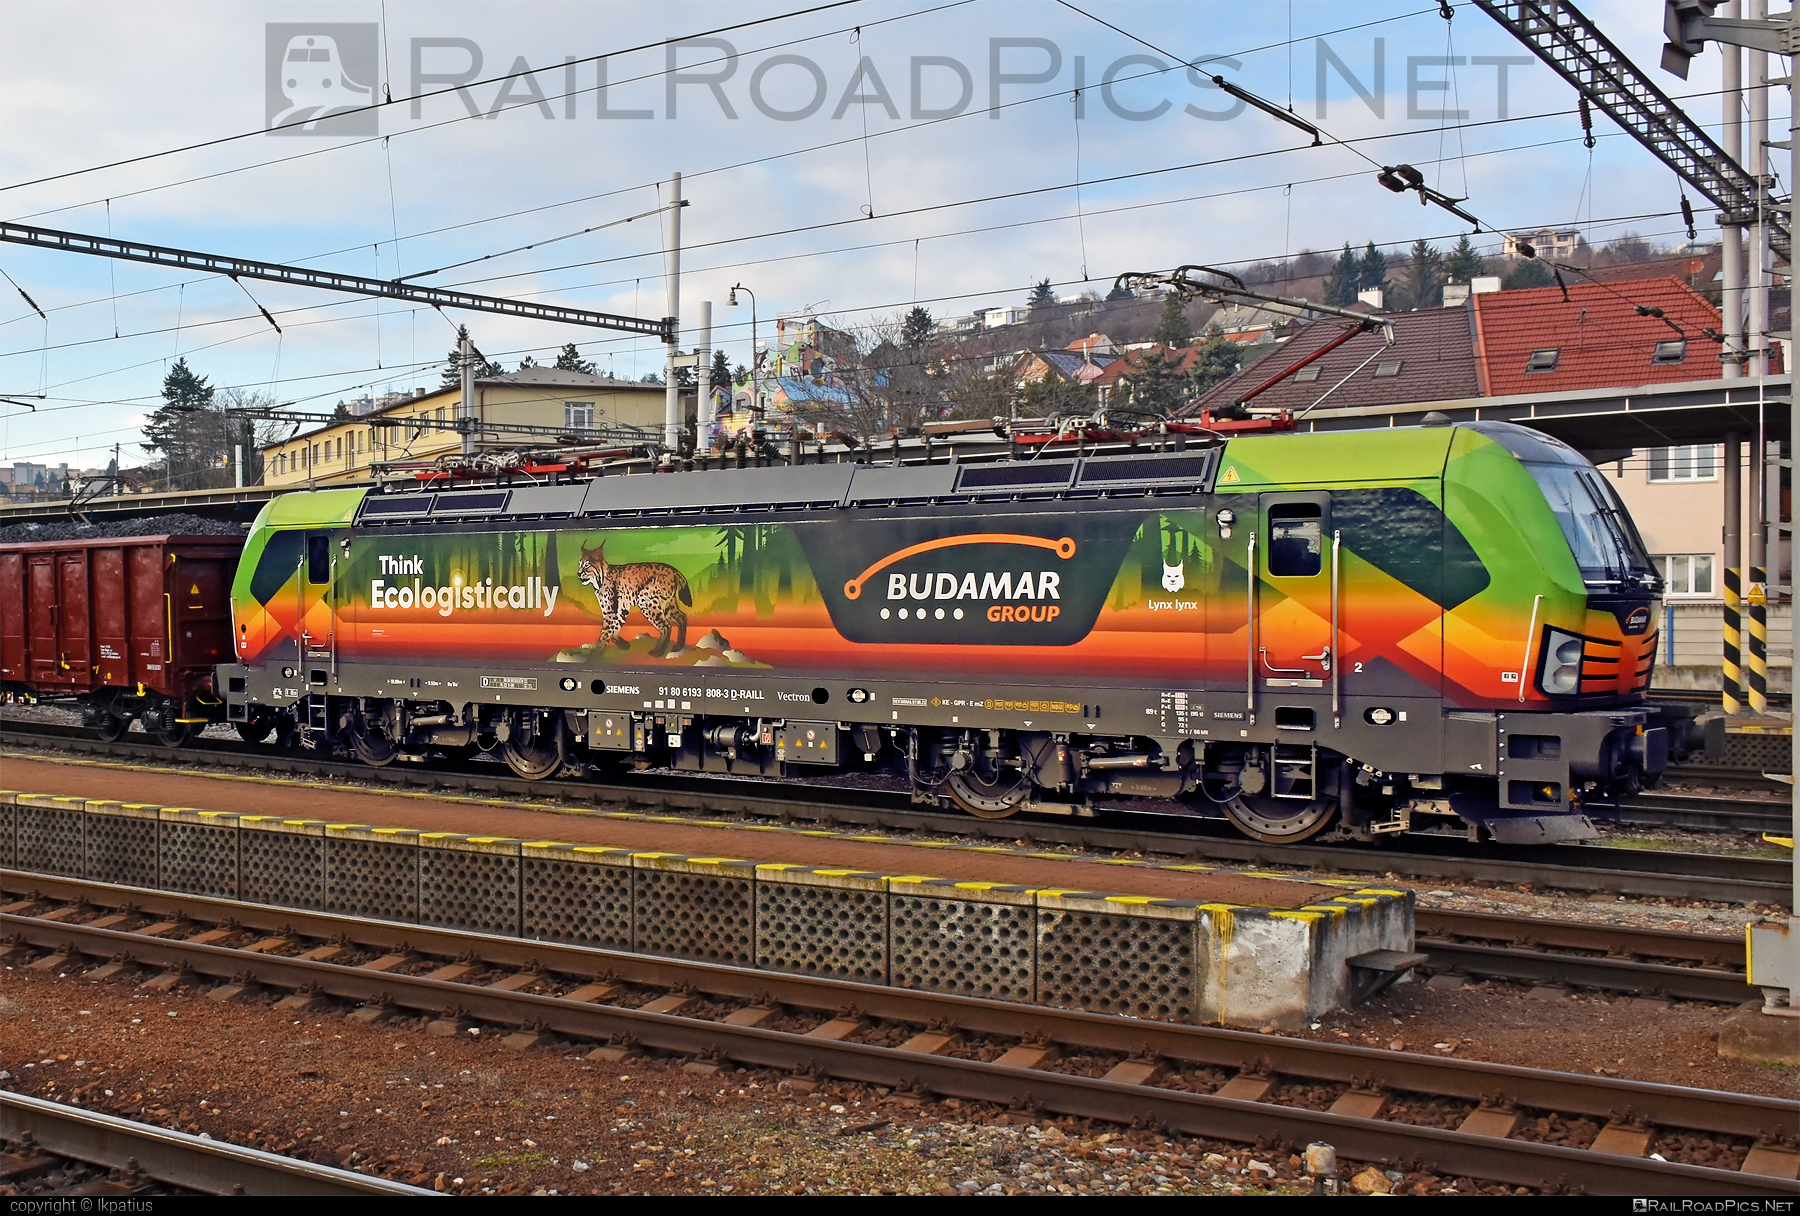 Siemens Vectron MS - 193 808-3 operated by LOKORAIL, a.s. #RollingStockLease #RollingStockLeaseSro #budamar #lokorail #lrl #raill #siemens #siemensVectron #siemensVectronMS #vectron #vectronMS